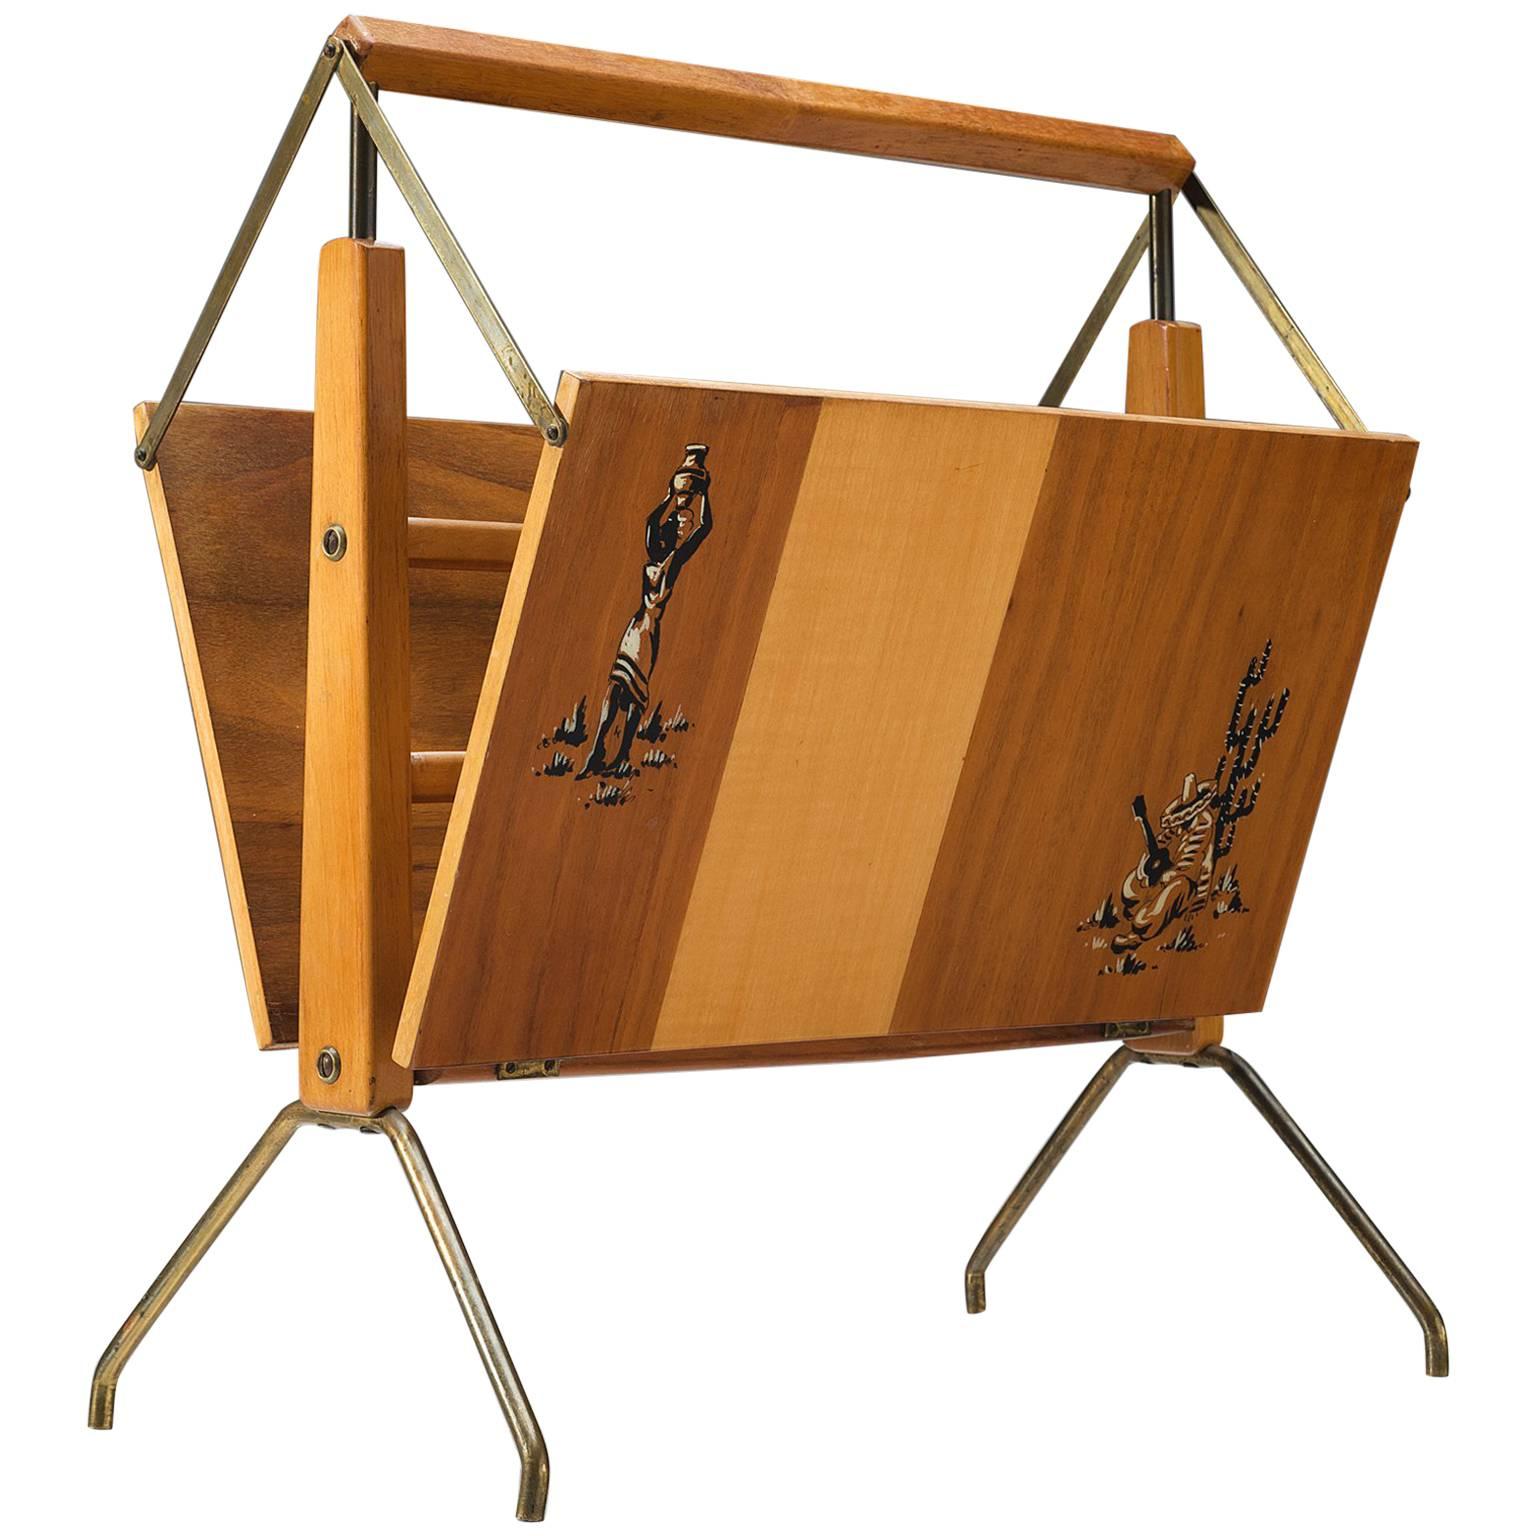 Foldable Magazine Rack Made of Wood and Brass